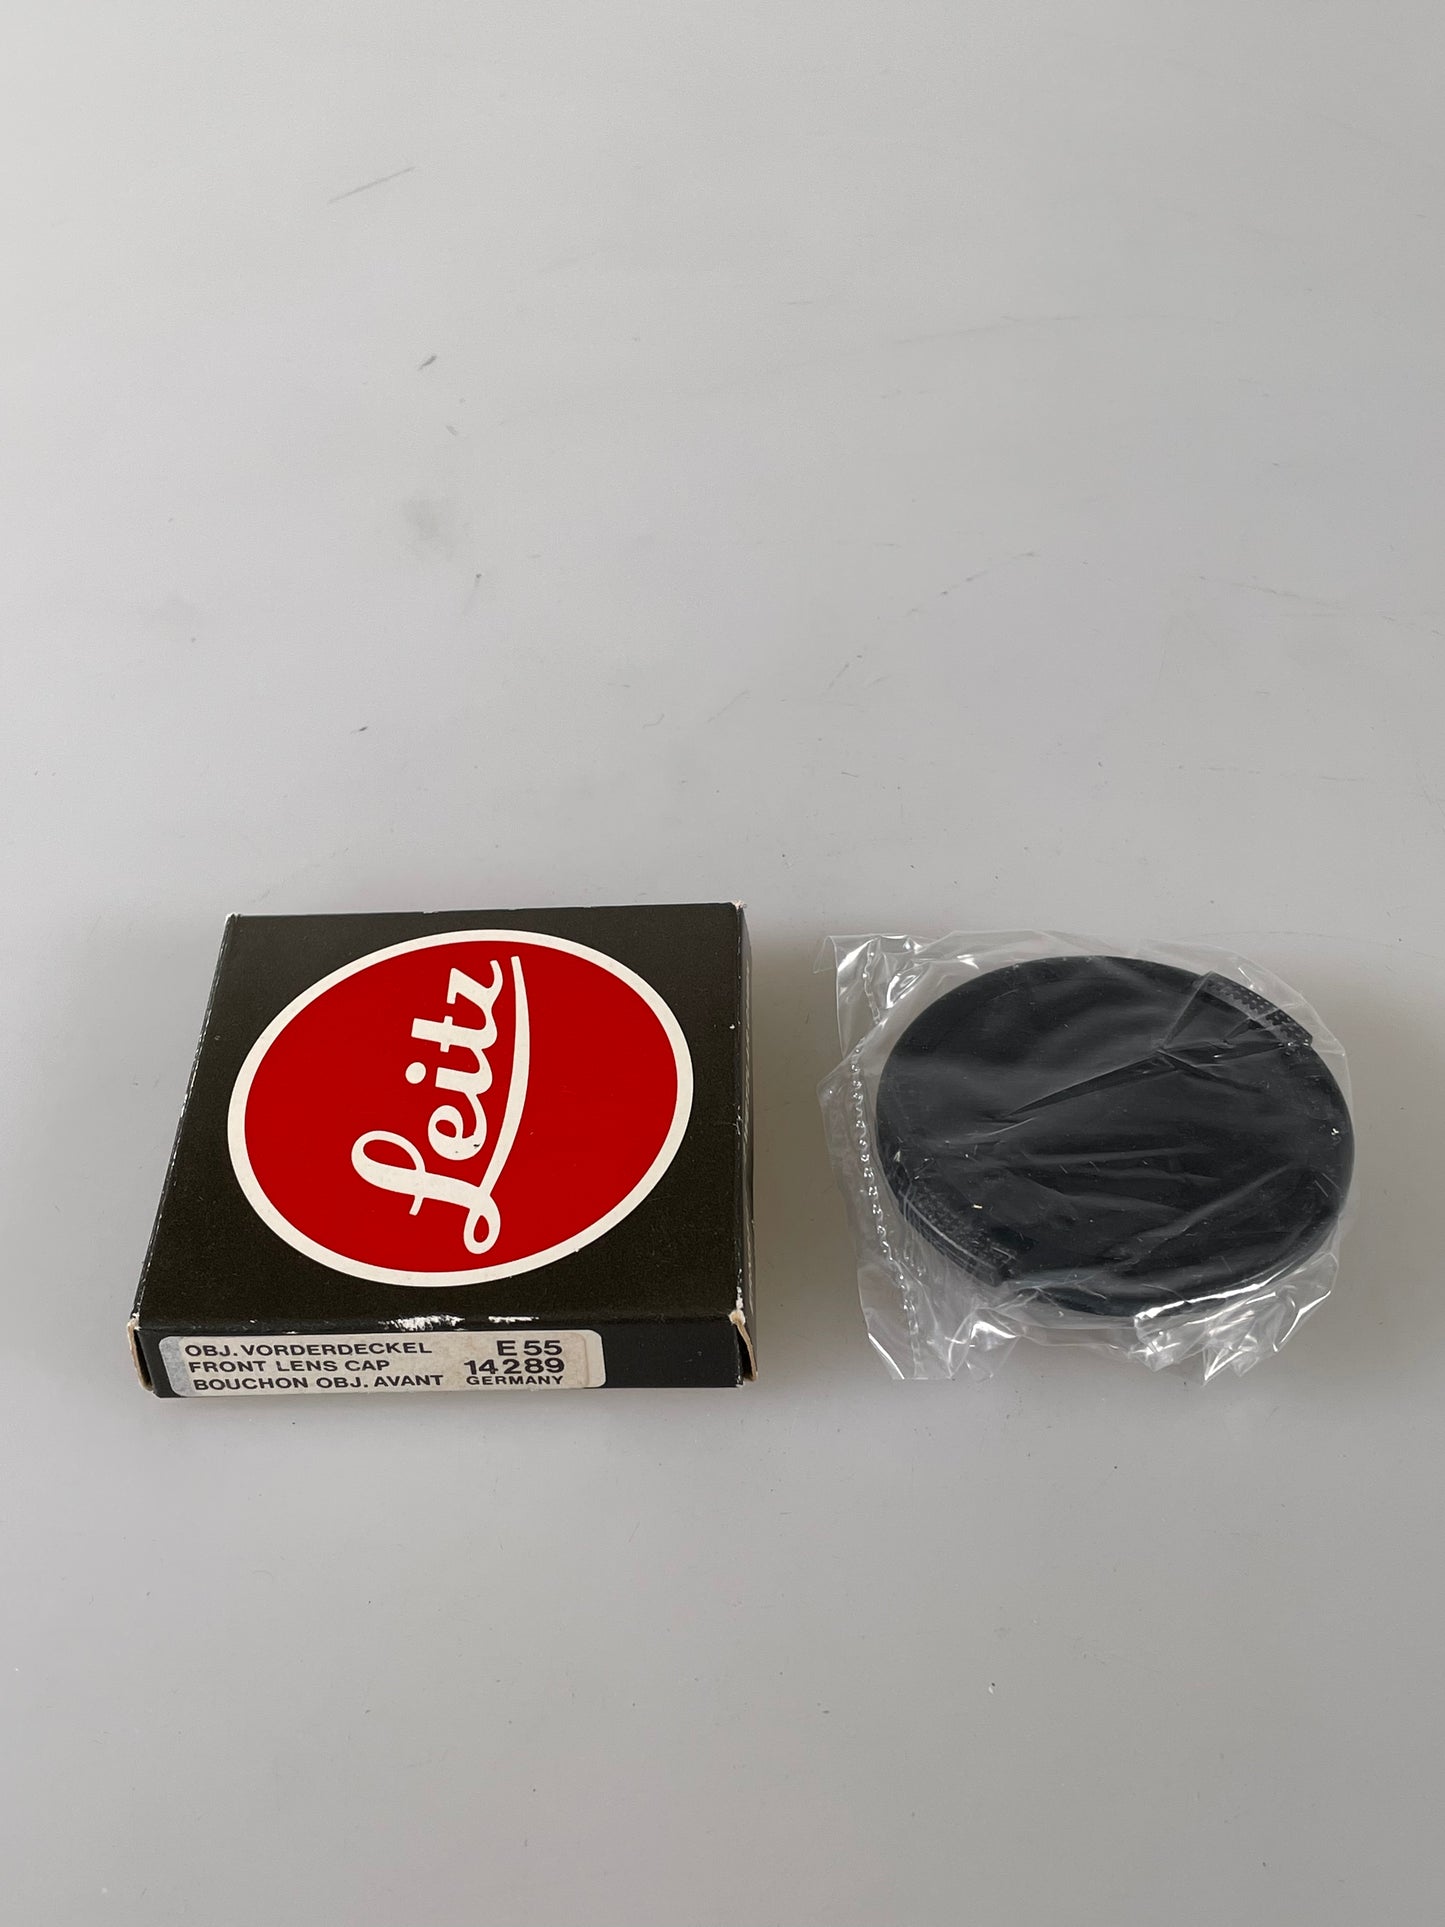 Leica 55mm (E55) Front Lens Cap, Black, Snap-On, 14289, for 90mm f/2 NOS